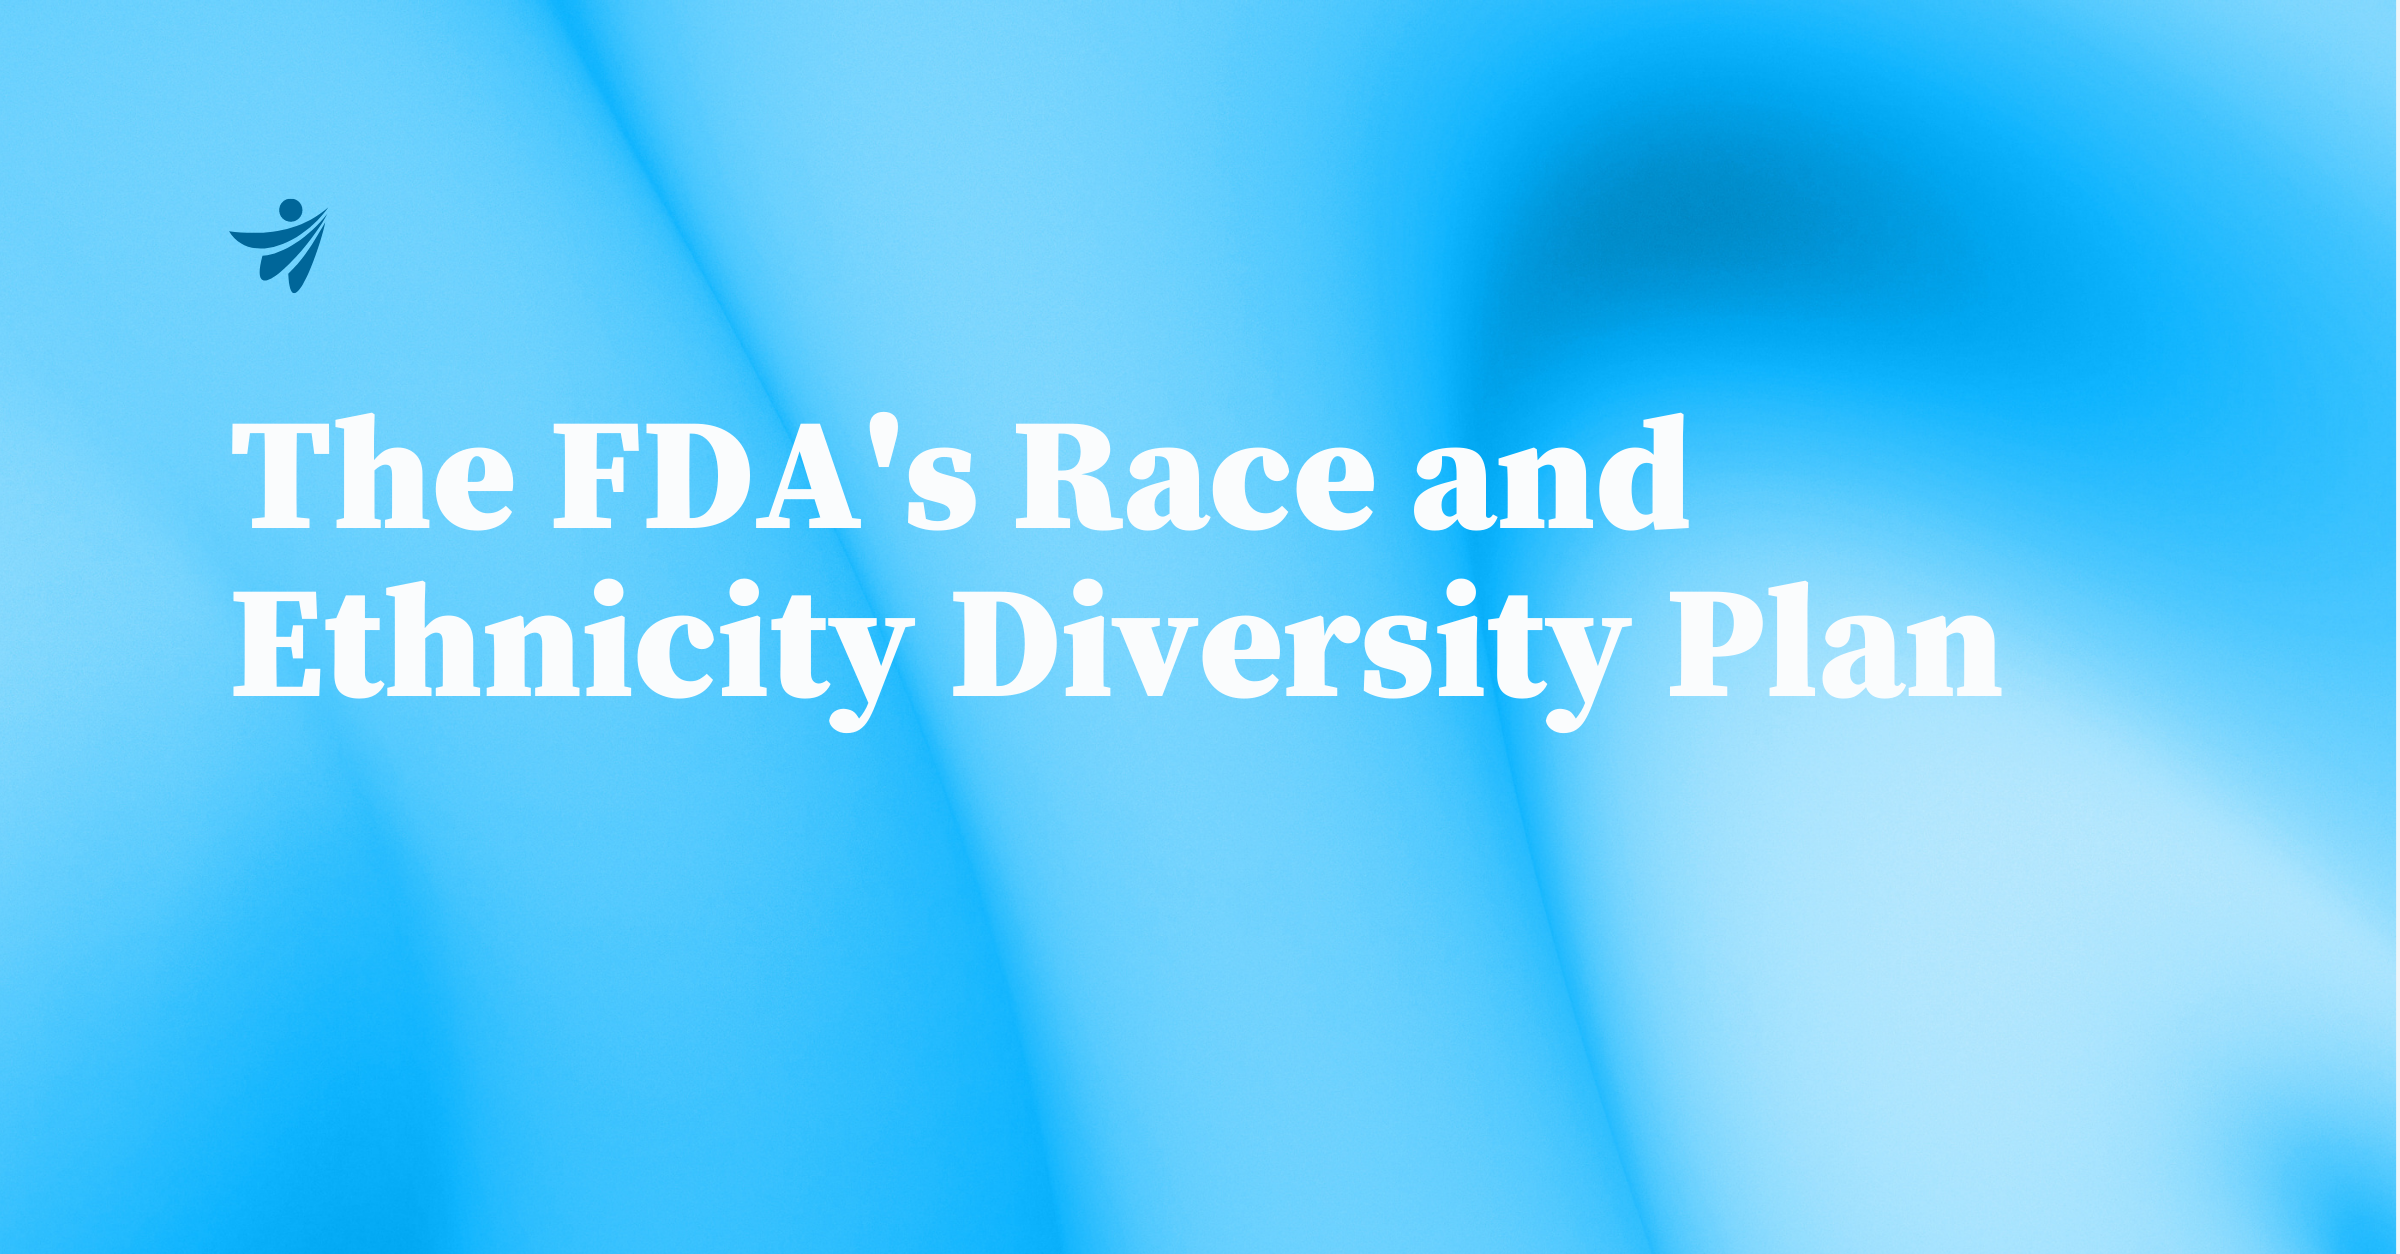 Thumbnail for The FDA now recommends that clinical trial sponsors submit a Race and Ethnicity Diversity Plan